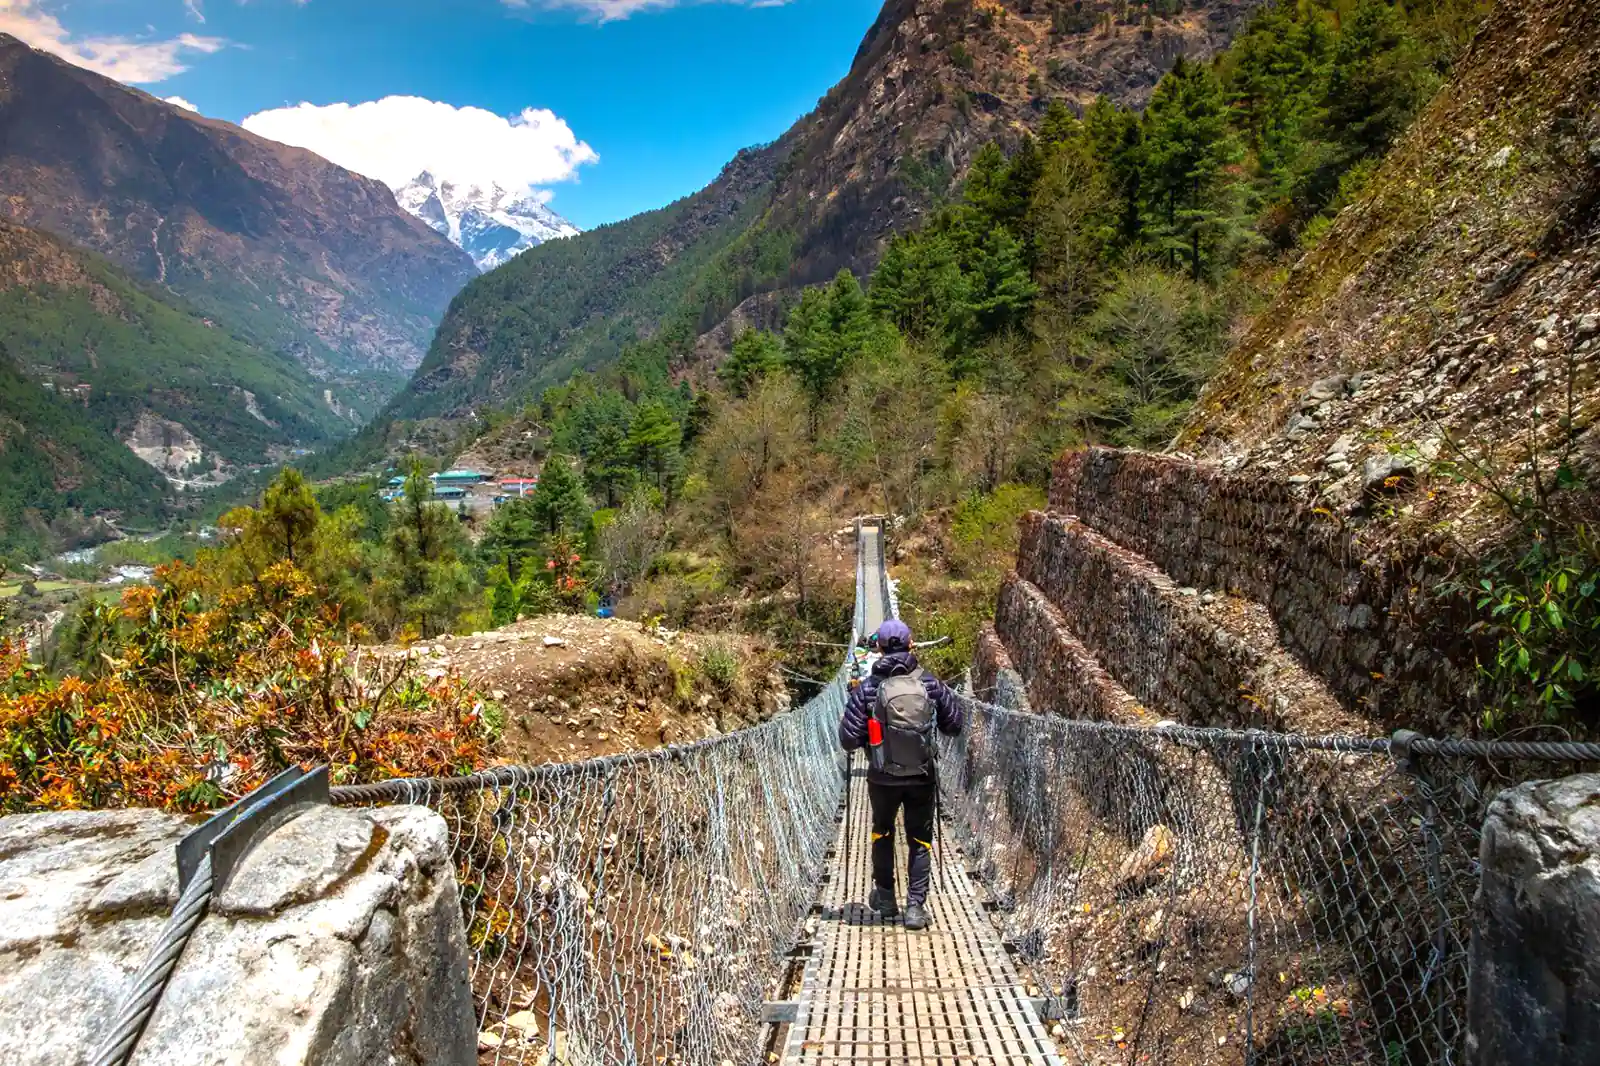 A backpacker crosses a suspension bridge on the trekking route from Lukla to Phakding, with snow-capped Himalayan mountains in the distance